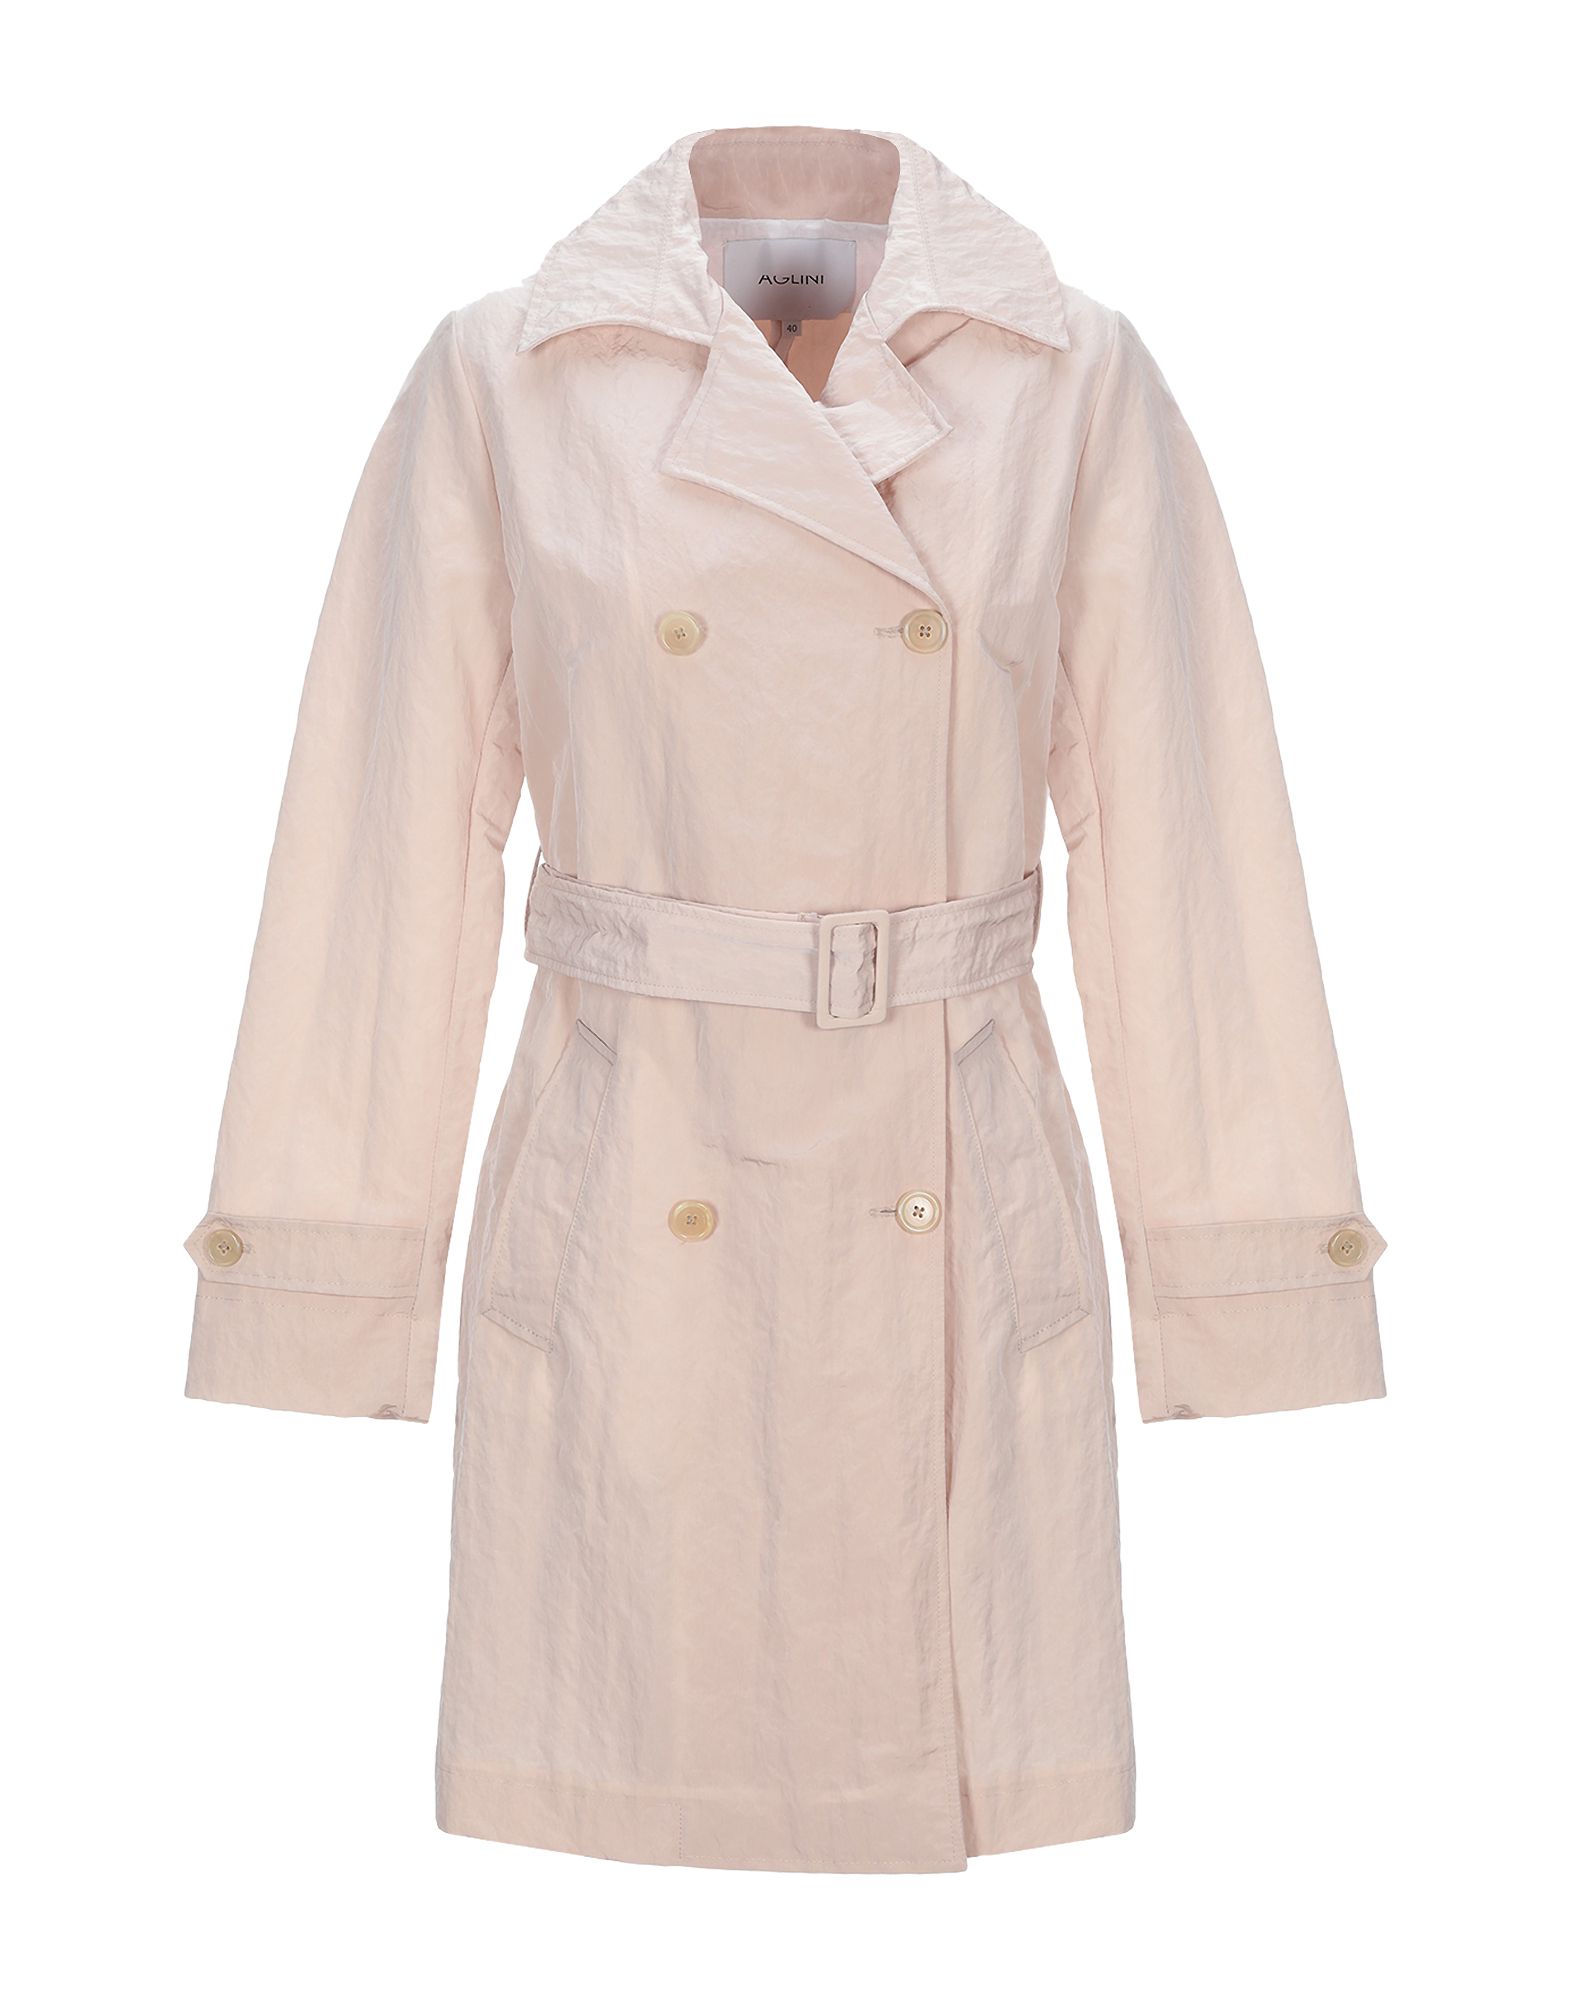 Aglini Belted Coats In Light Pink